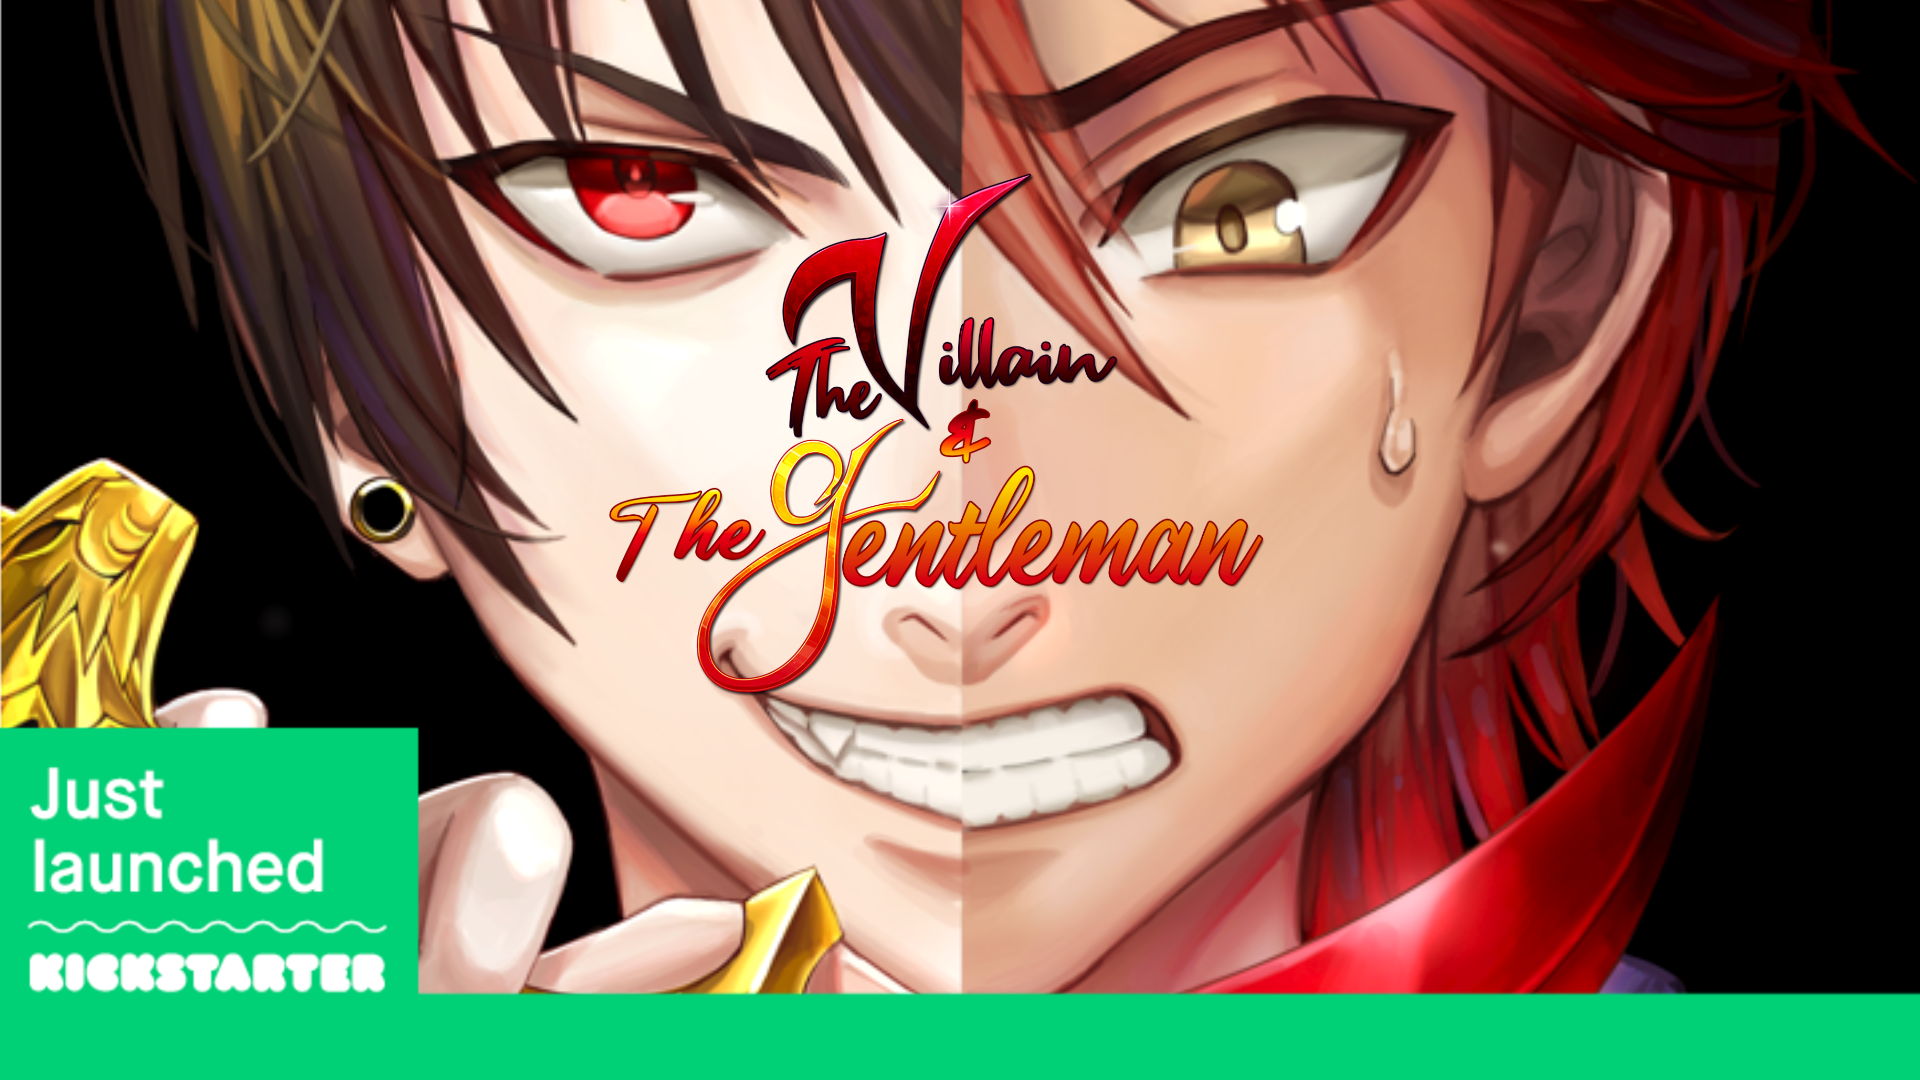 The Villain and the Gentleman Demo